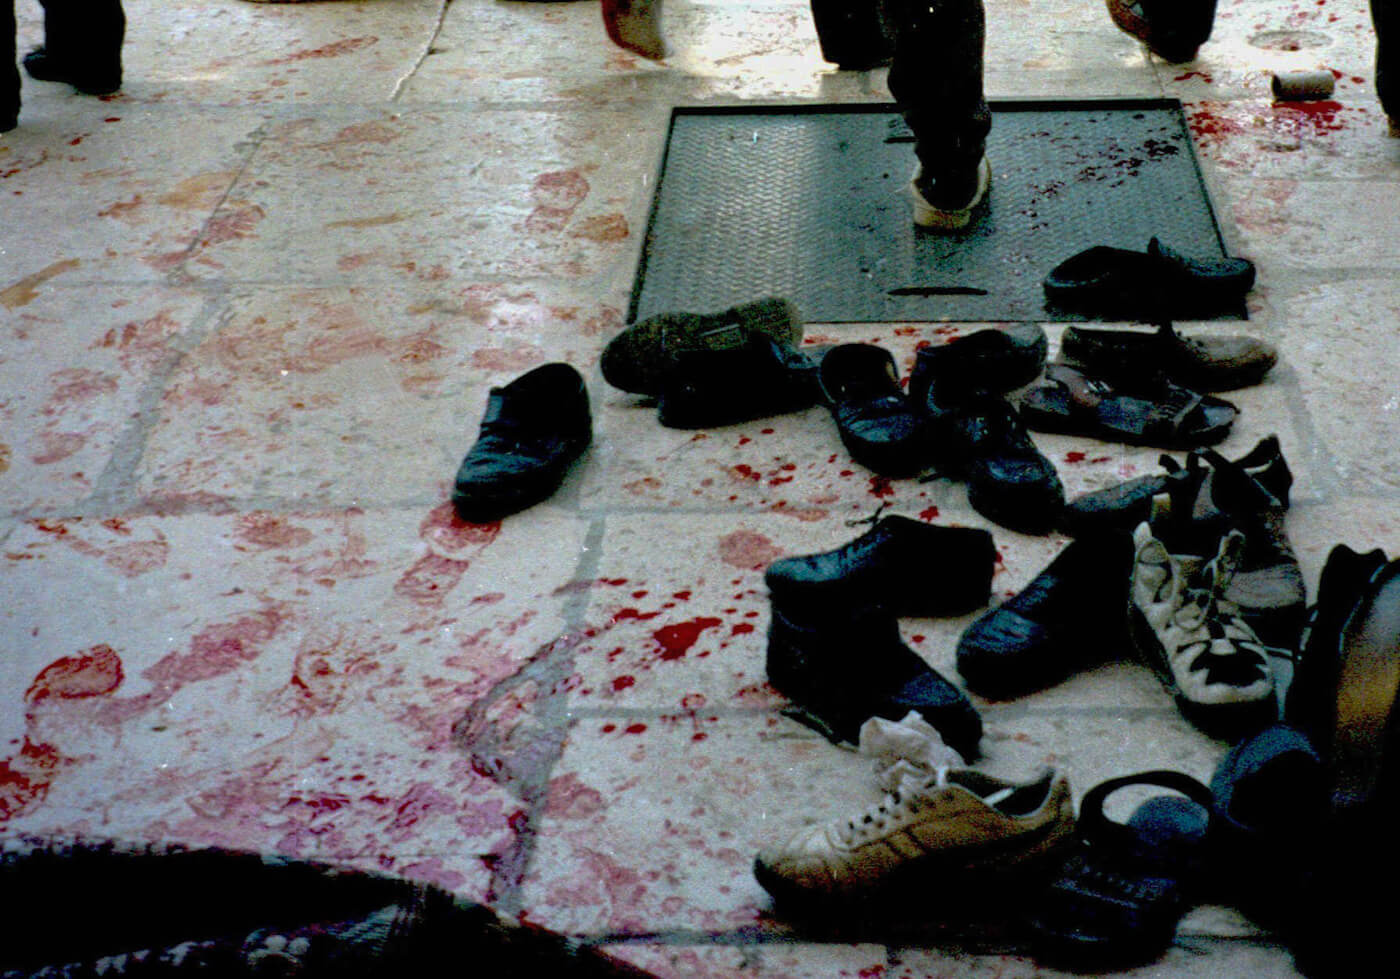 Blood-stained footmarks mark the entrance to Al Aqsa Mosque after Israeli police opened fire on Palestinian worshipers in 1996. Khaled Zighari | AP